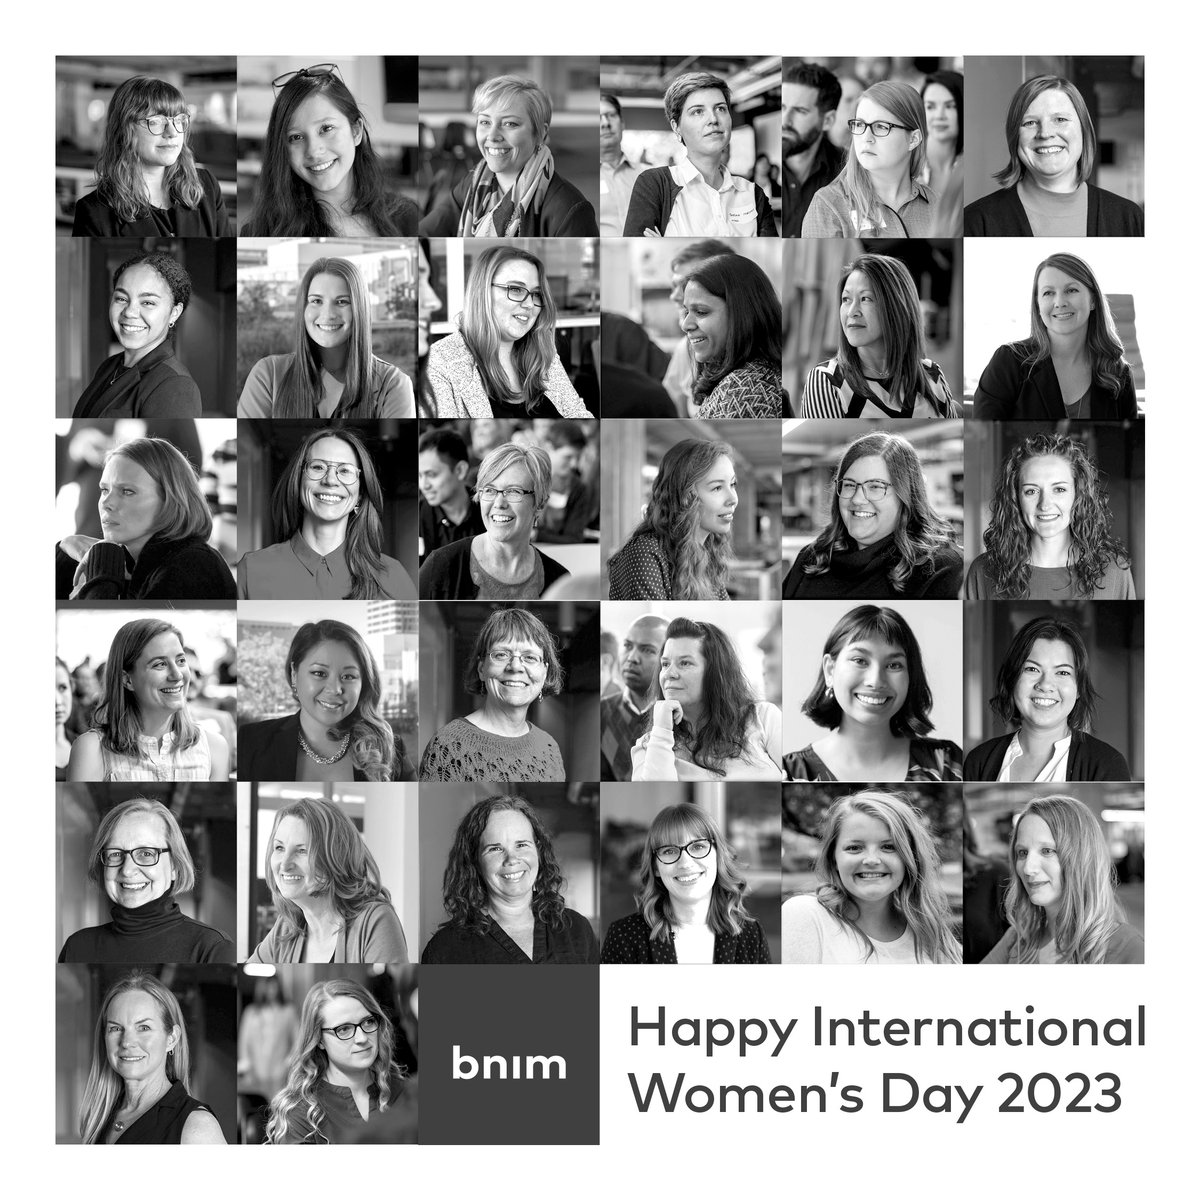 On #InternationalWomensDay we recognize the talented, passionate, & strong women at BNIM! We appreciate all women in the industry & the work they do to create a more equitable profession &inspire the next generation of change makers. #bnim #humansofbnim #IWD2023 #embraceequity